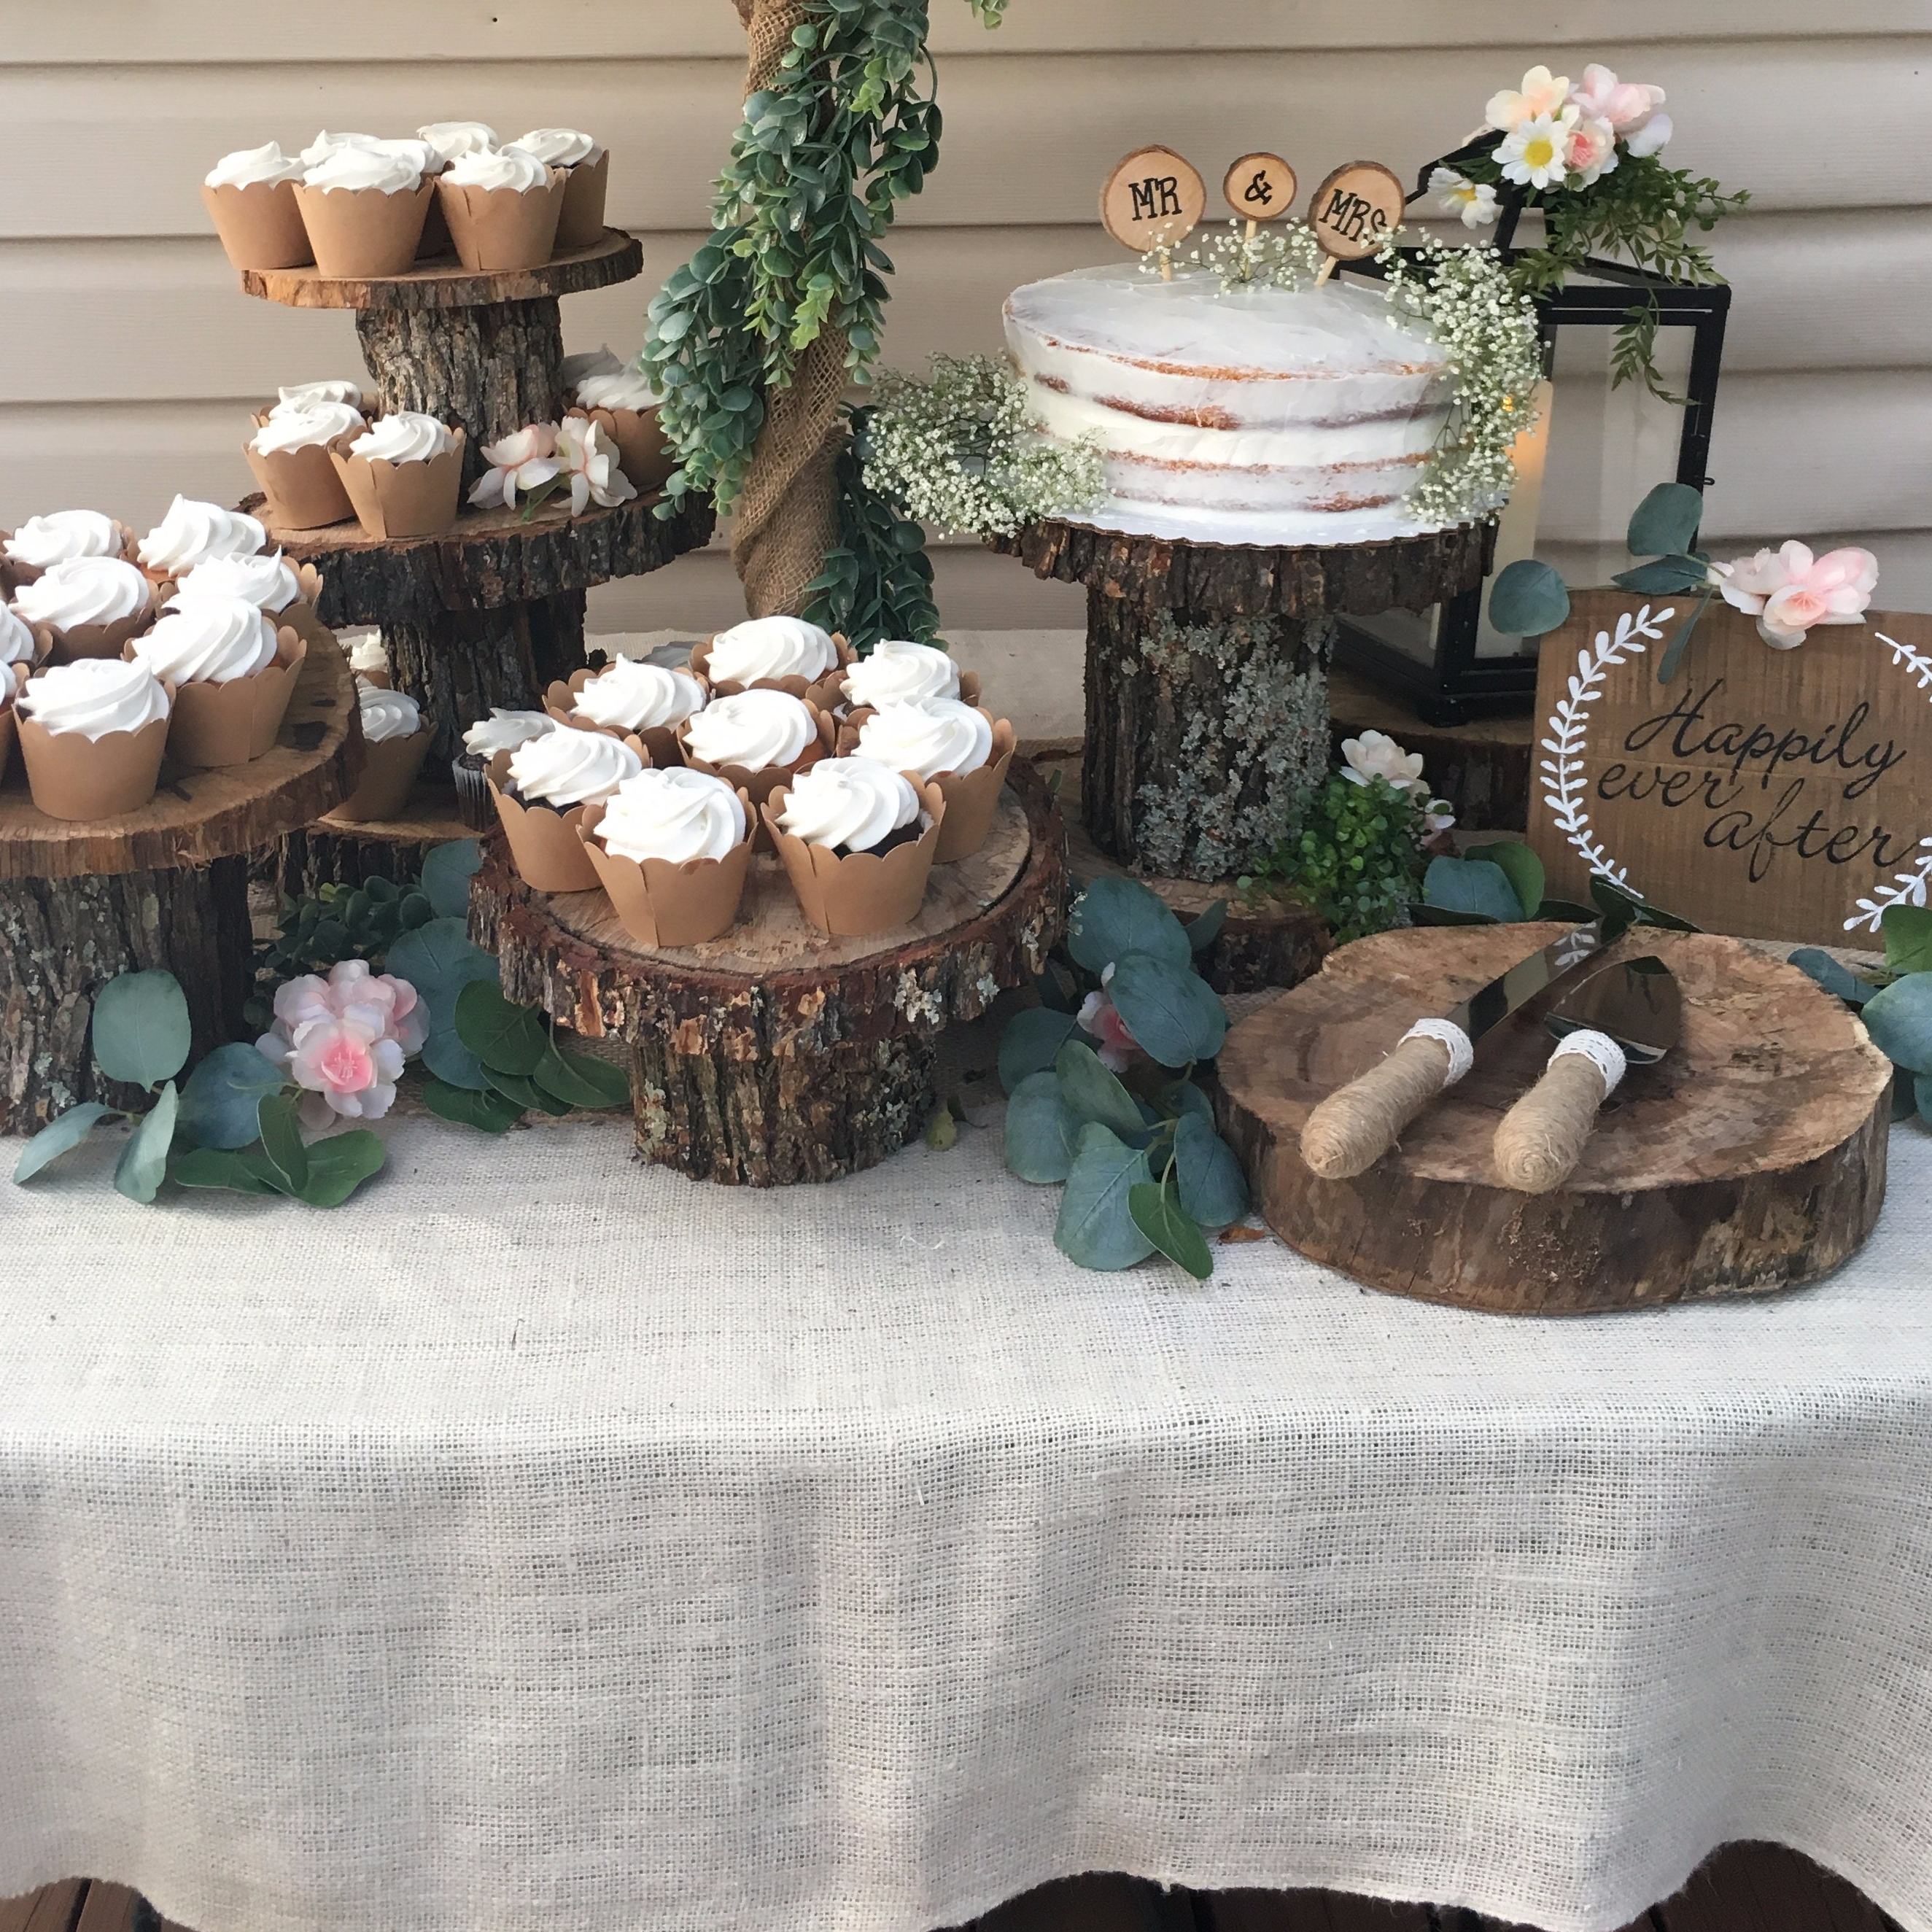 Ideas for an easy & inexpensive rustic outdoor wedding ...